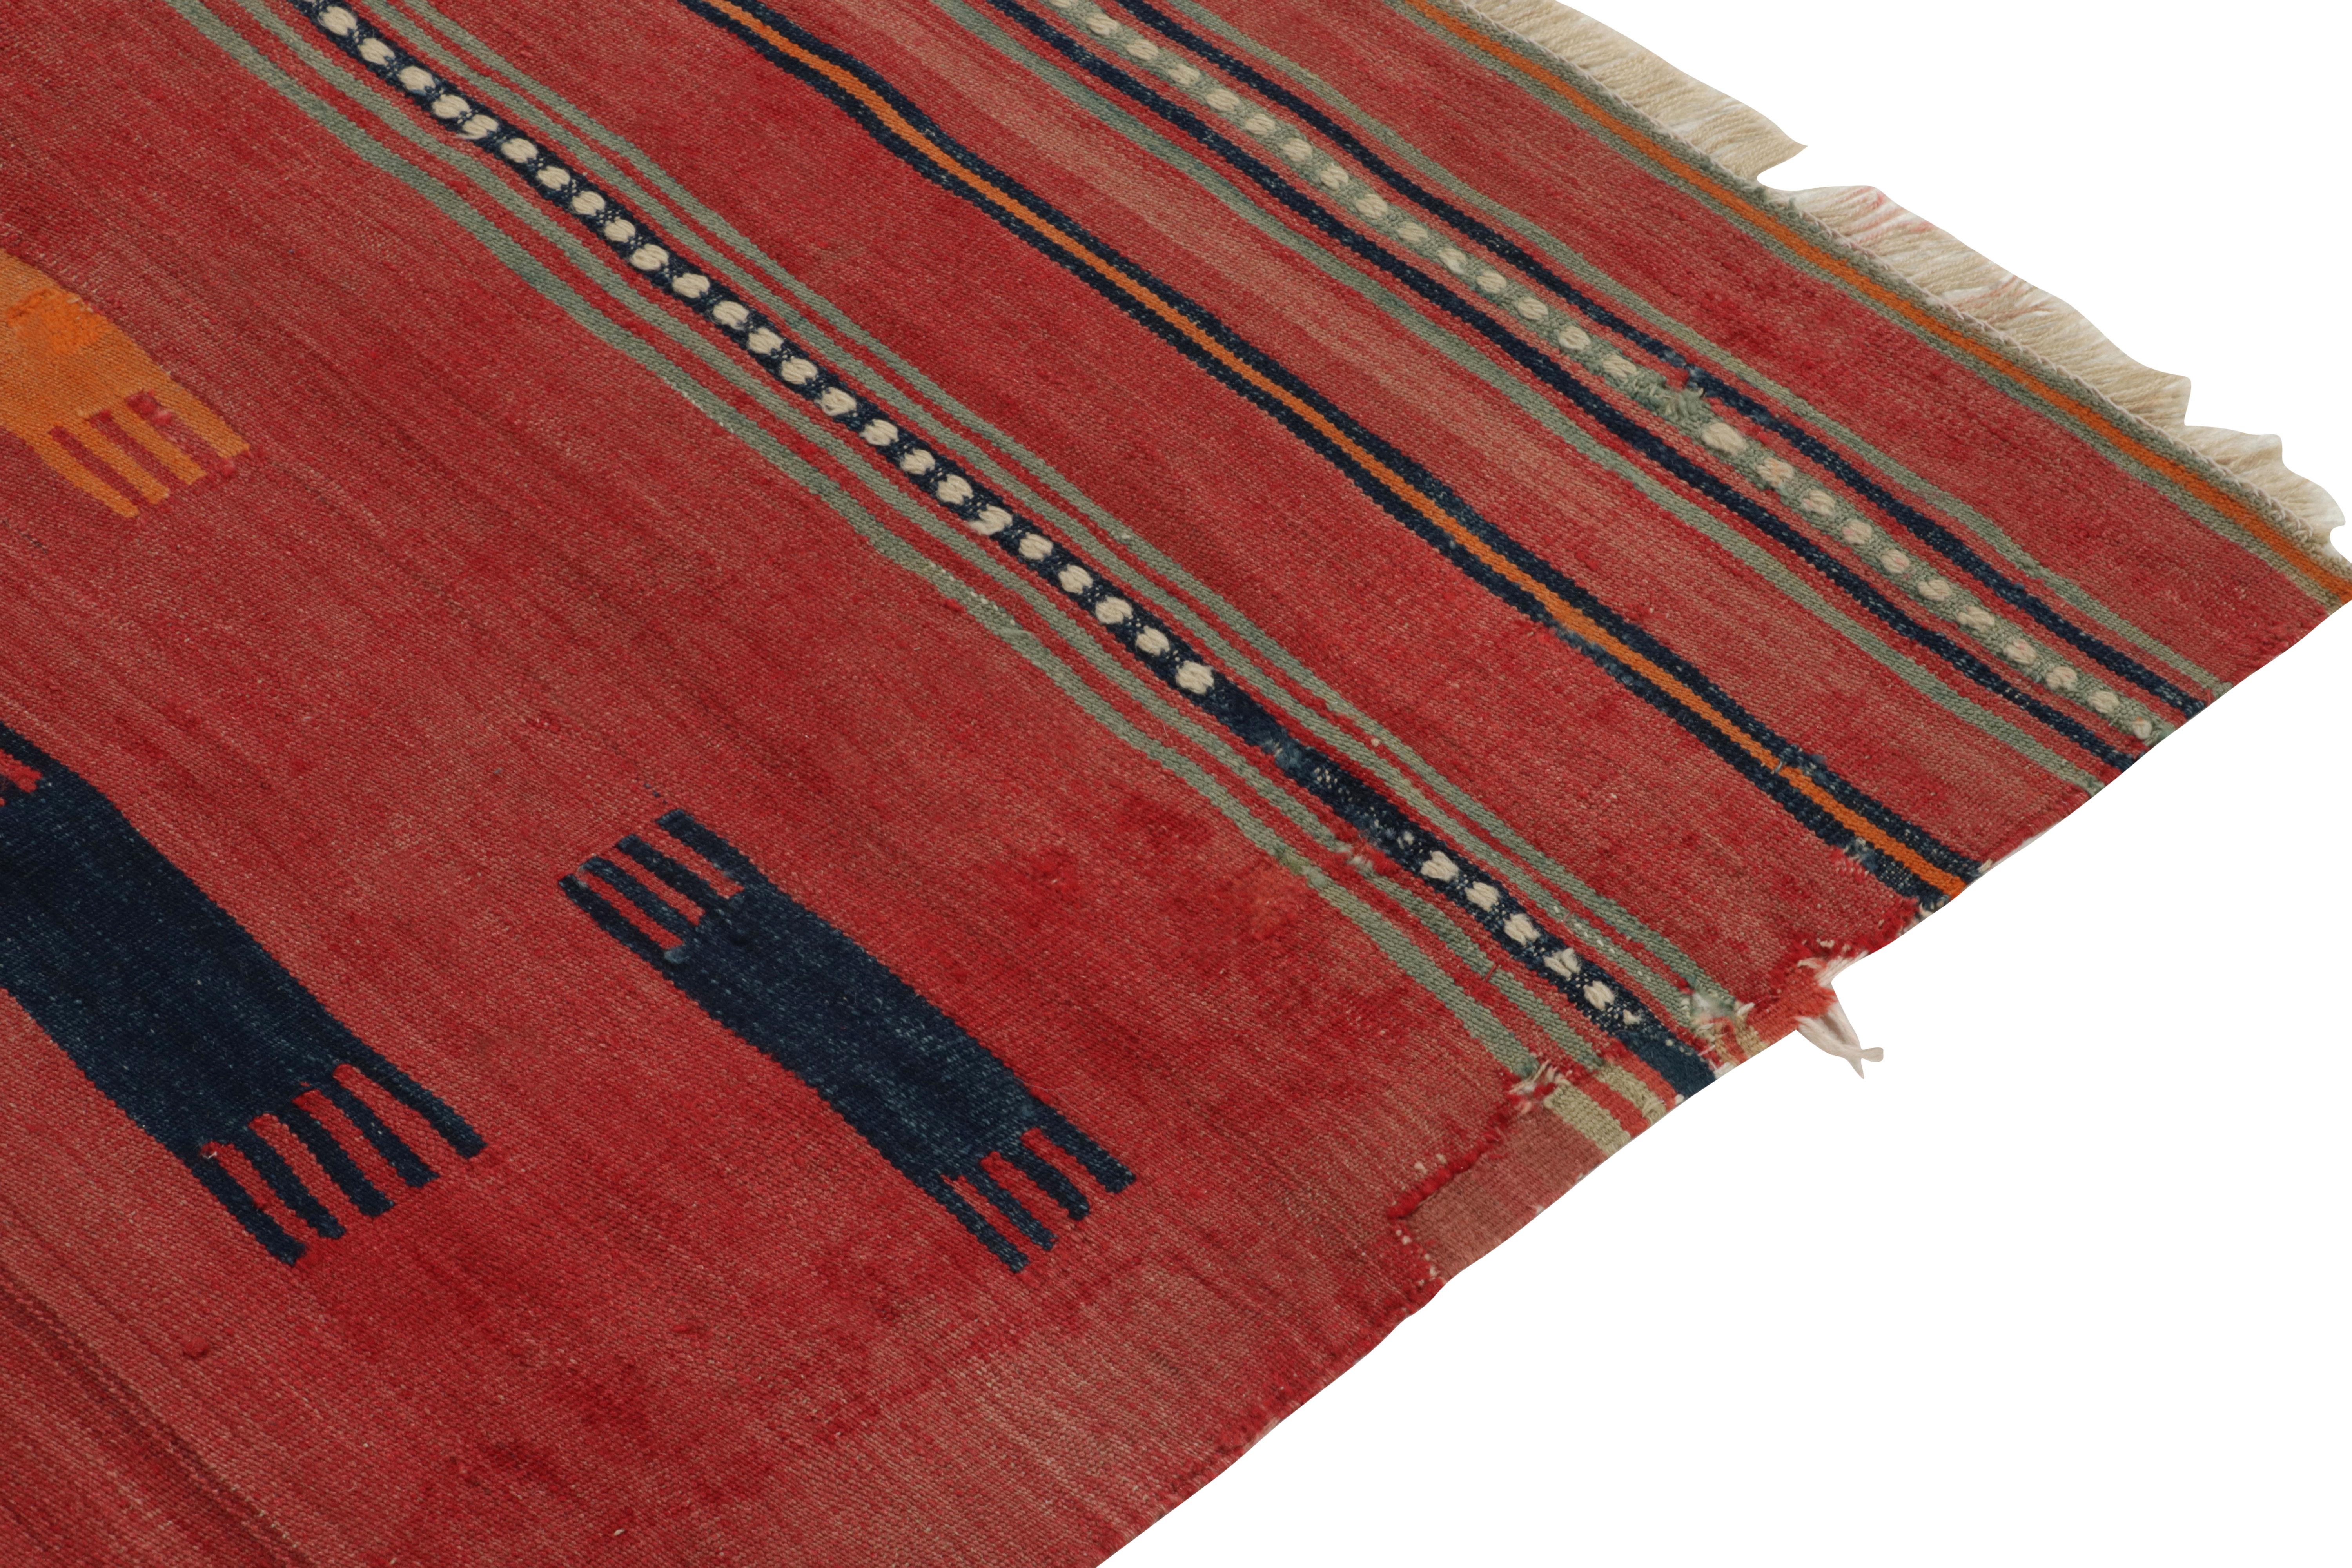 Antique Tribal Kilim rug in Red, Blue Tribal Geometric Pattern by Rug & Kilim In Good Condition For Sale In Long Island City, NY